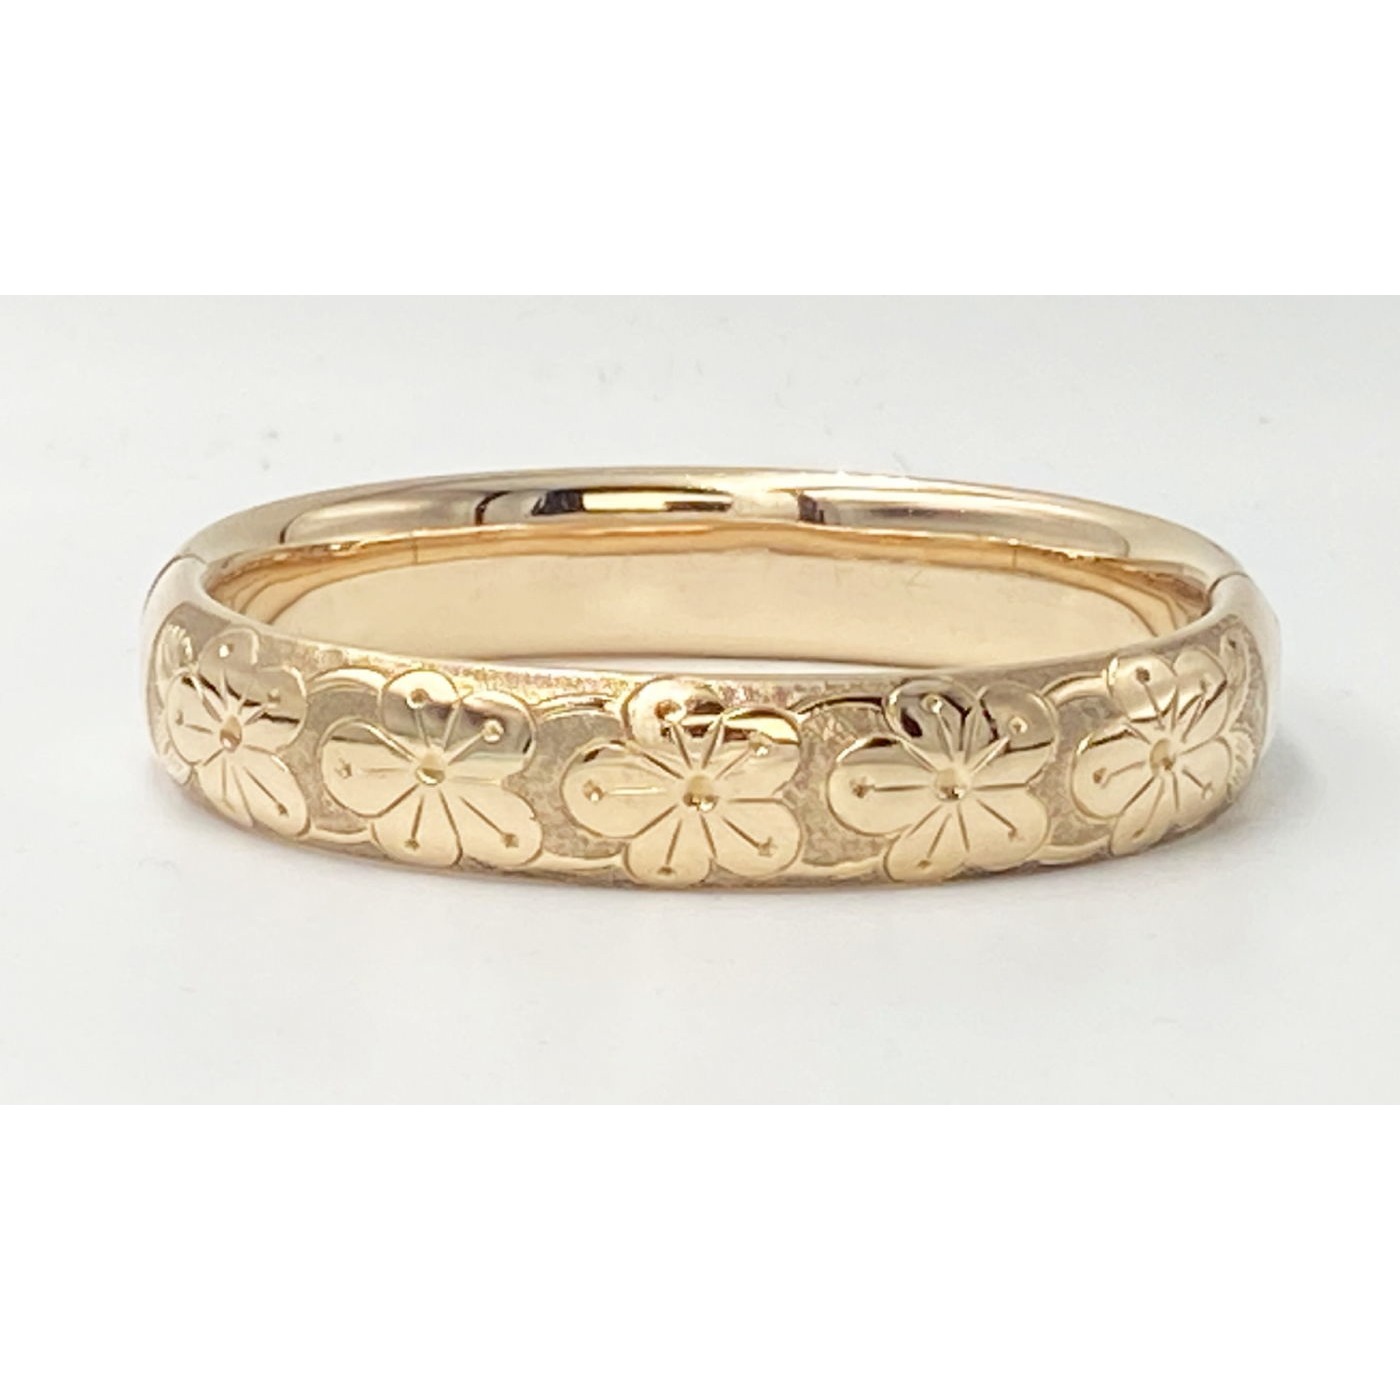 Lovely Row of Pansies Narrow Stacker Engagement Bangle - 7.25" Wrist